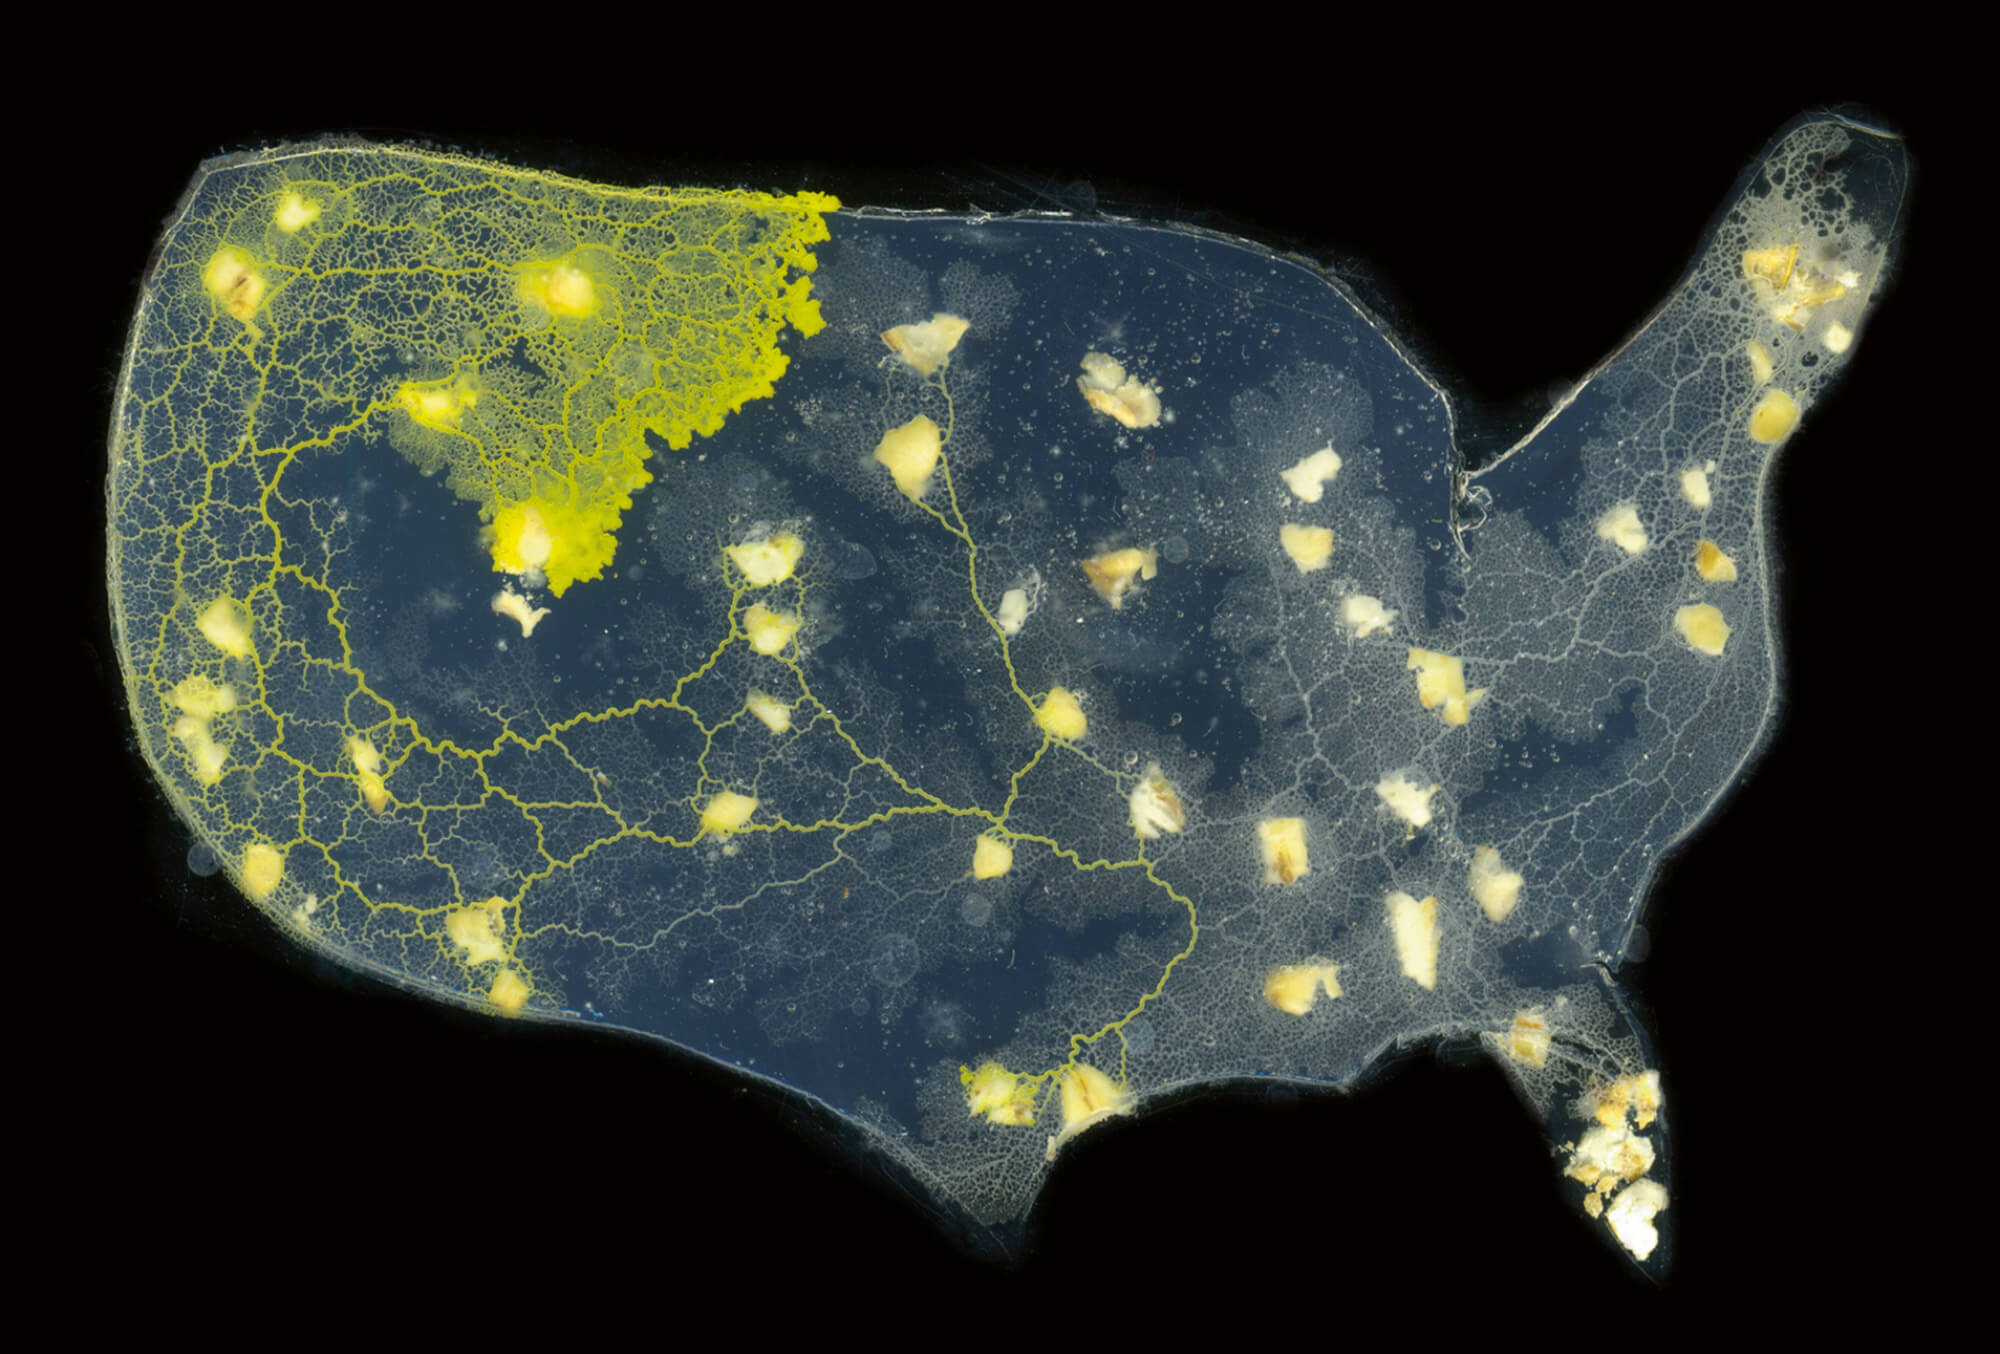 An image of the slime mold Physarum polycephalum, used in laboratories across the world to map more efficient highway and subway networks. This particular mold was used during an experiment staged at the International Center of Unconventional Computing at the University of the West of England, and the mold is redrawing the US interstate highway system. 